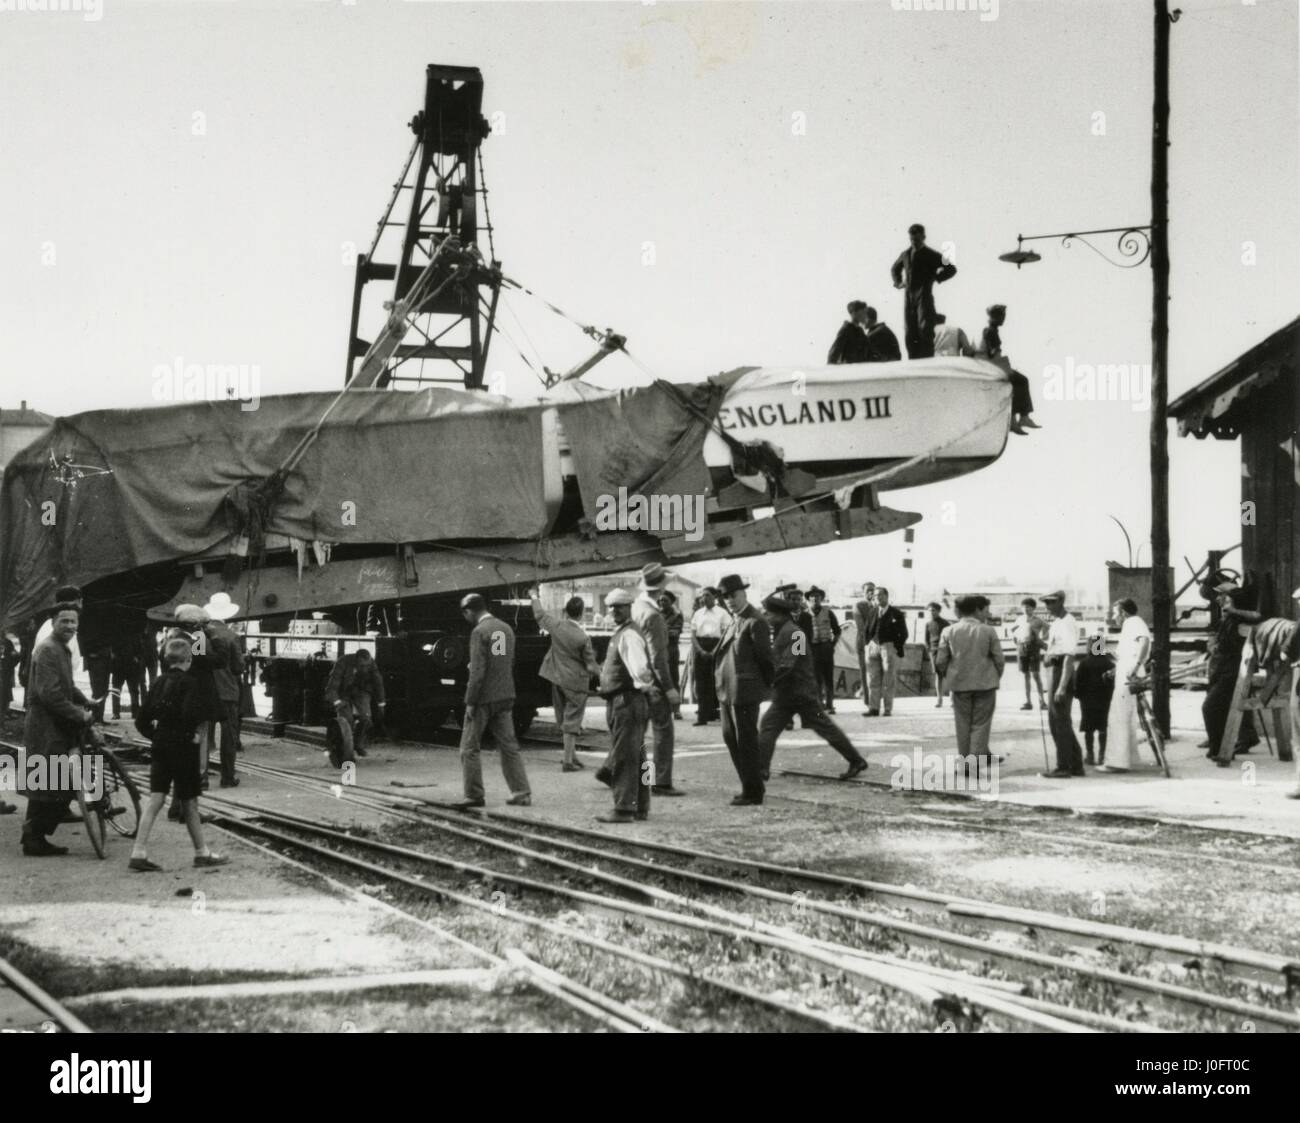 Held aloft by a crane on land, Miss England III, a speedboat built by Thornycroft Stock Photo